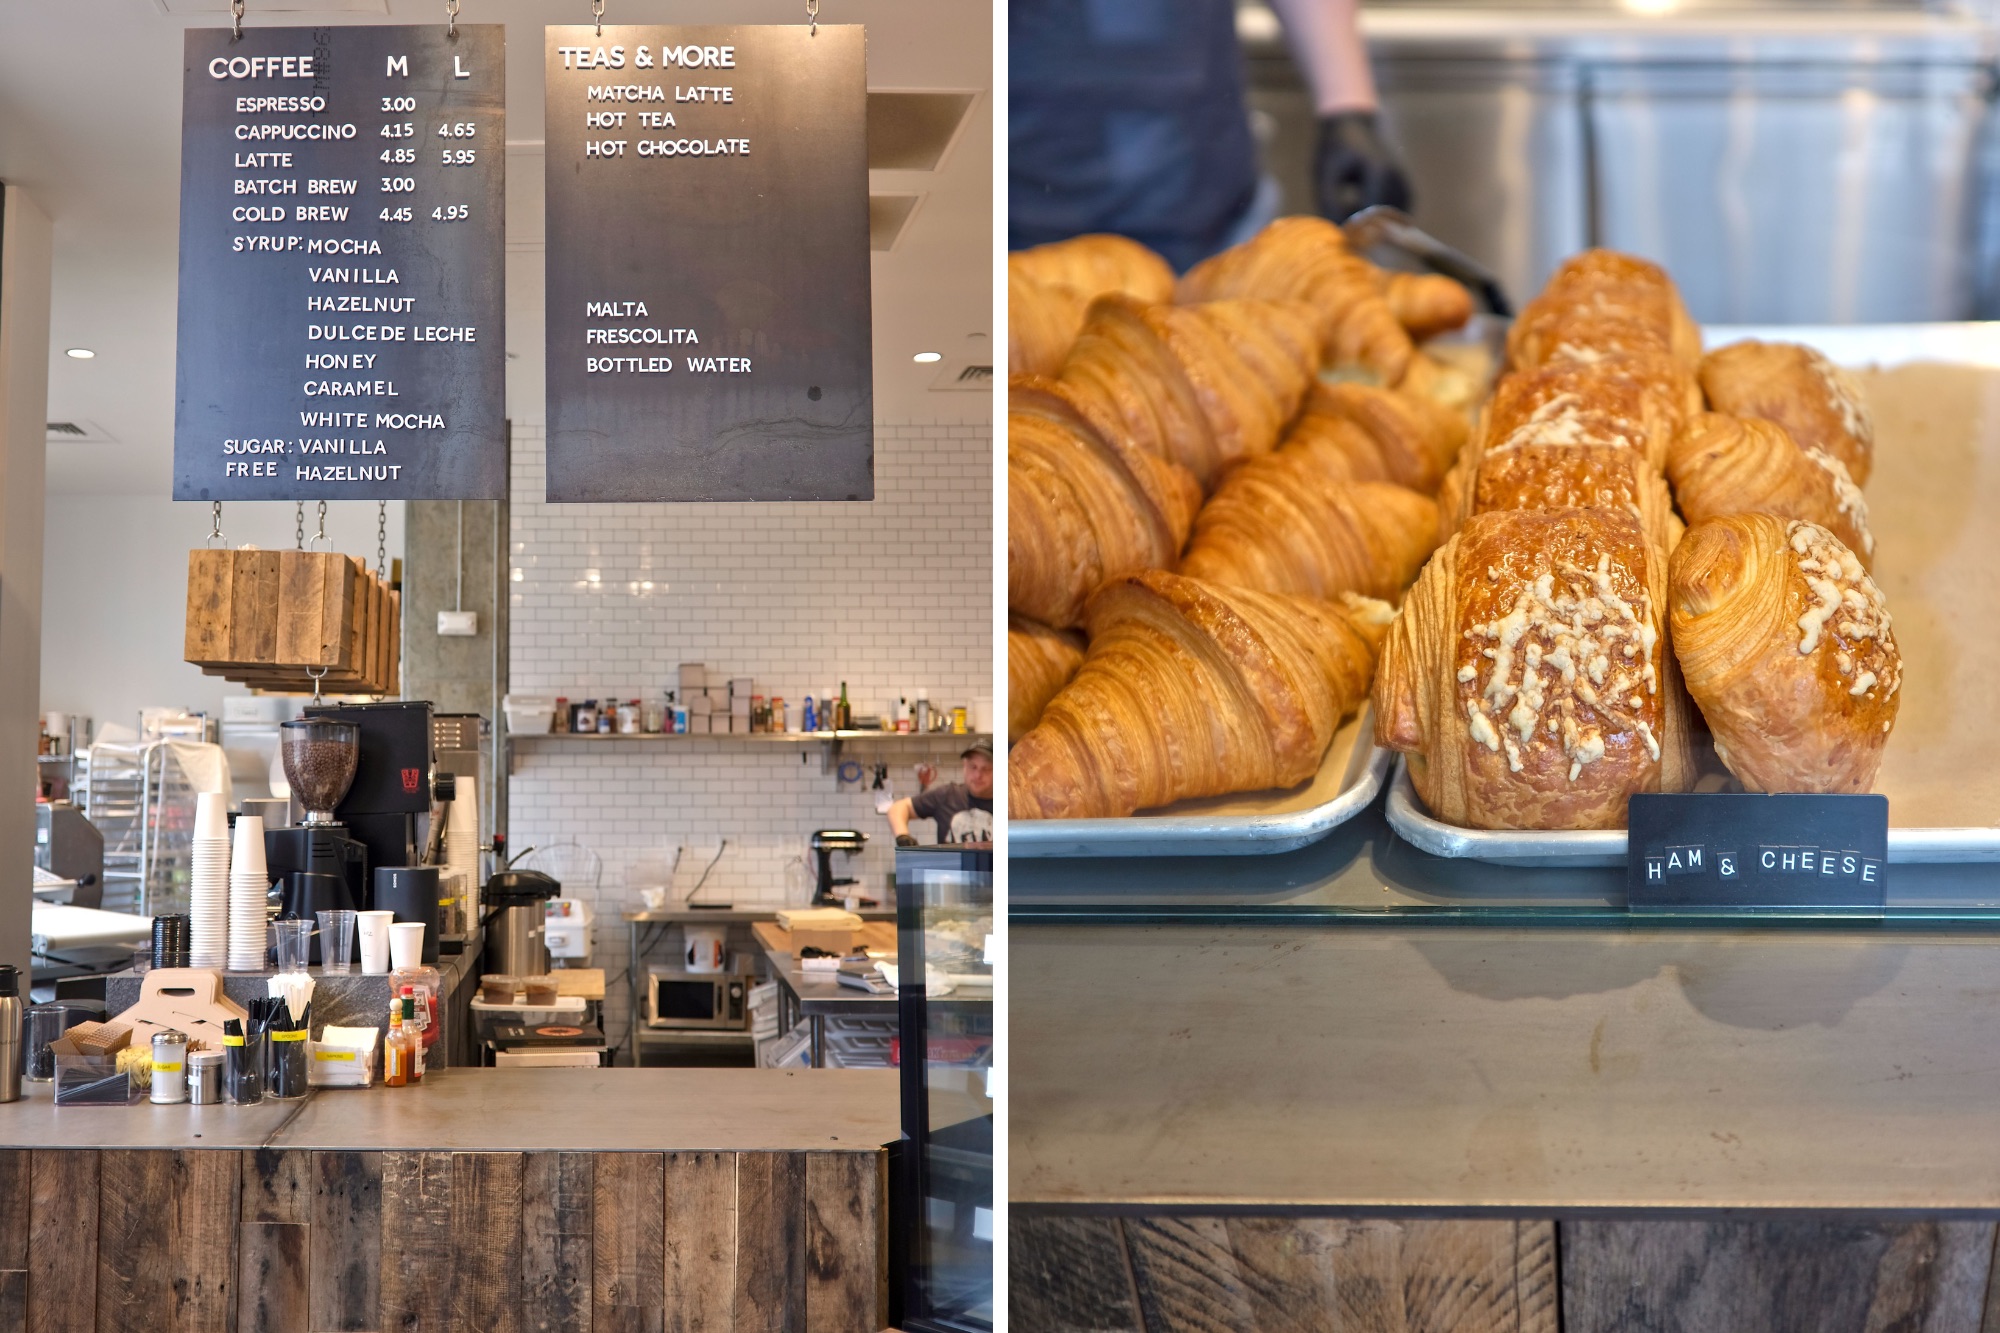 The coffee station at Vicente and a case of sweet and savory croissants